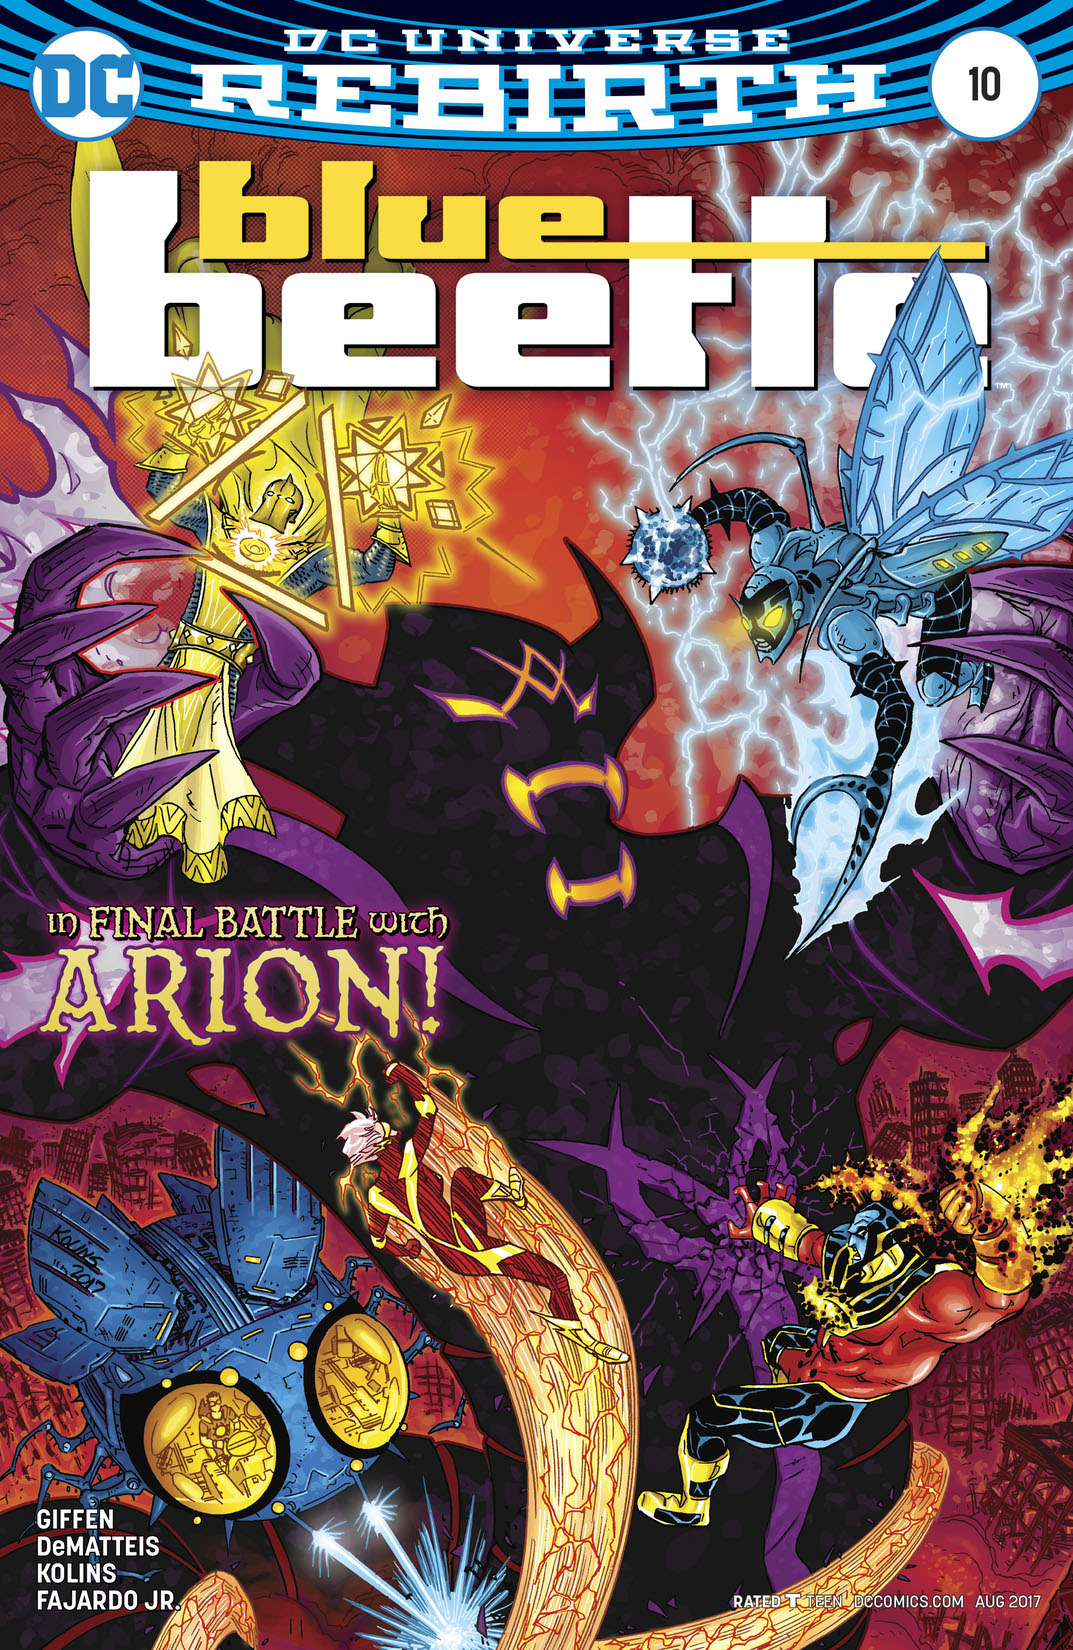 Blue Beetle (2016-) #10 preview images